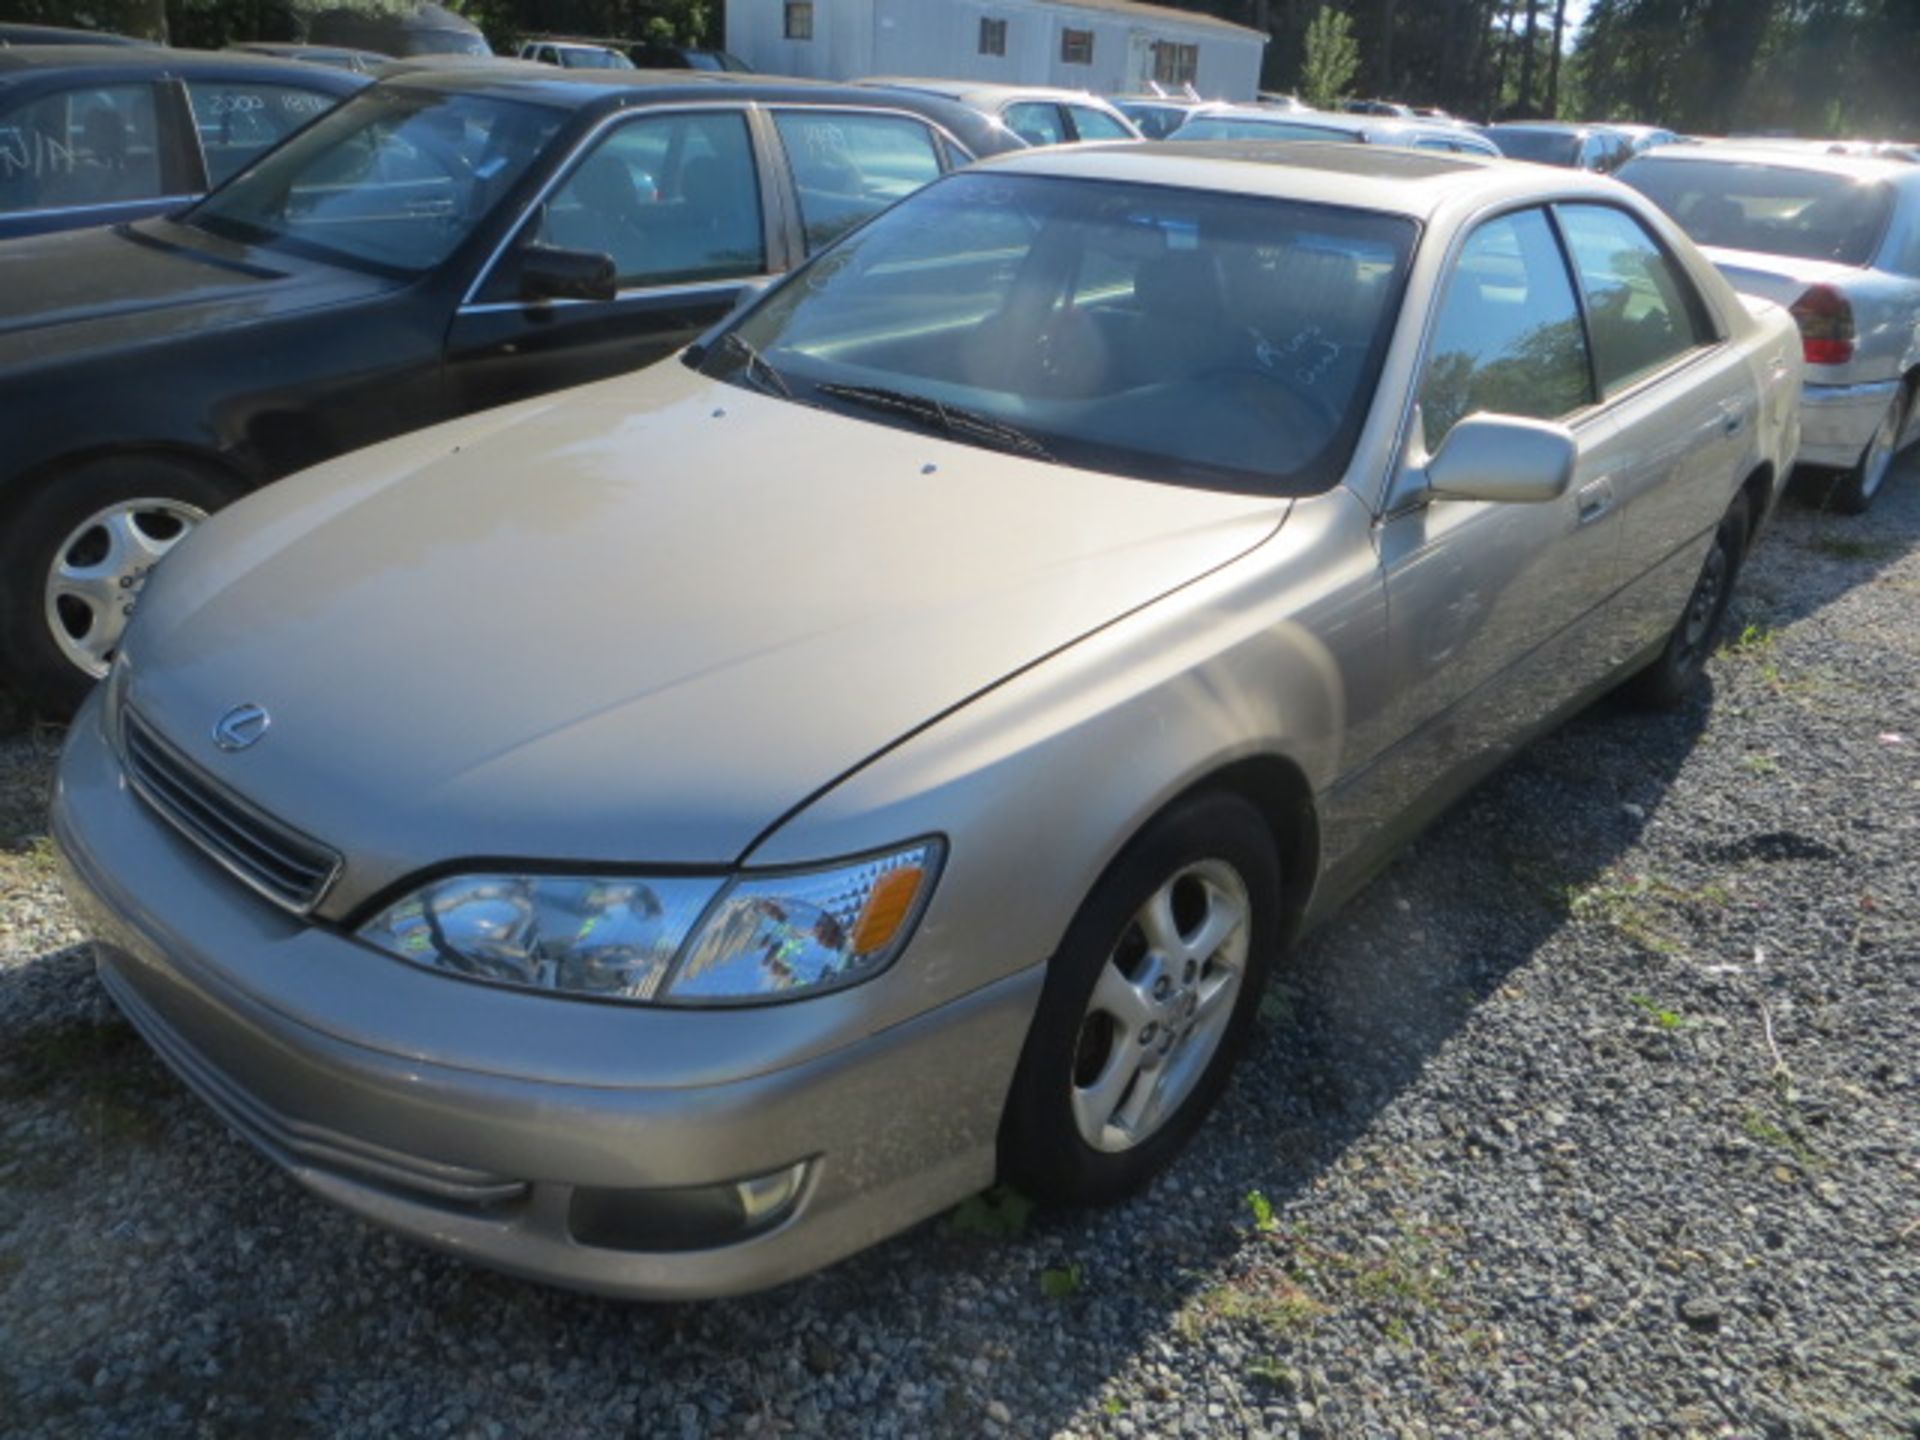 2000 Lexus ES300 238000 MILES,VIN JT8F28G3Y5093632, SOLD WITH GOOD TRANSFERABLE TITLE, ALL VEHICLES - Image 2 of 3